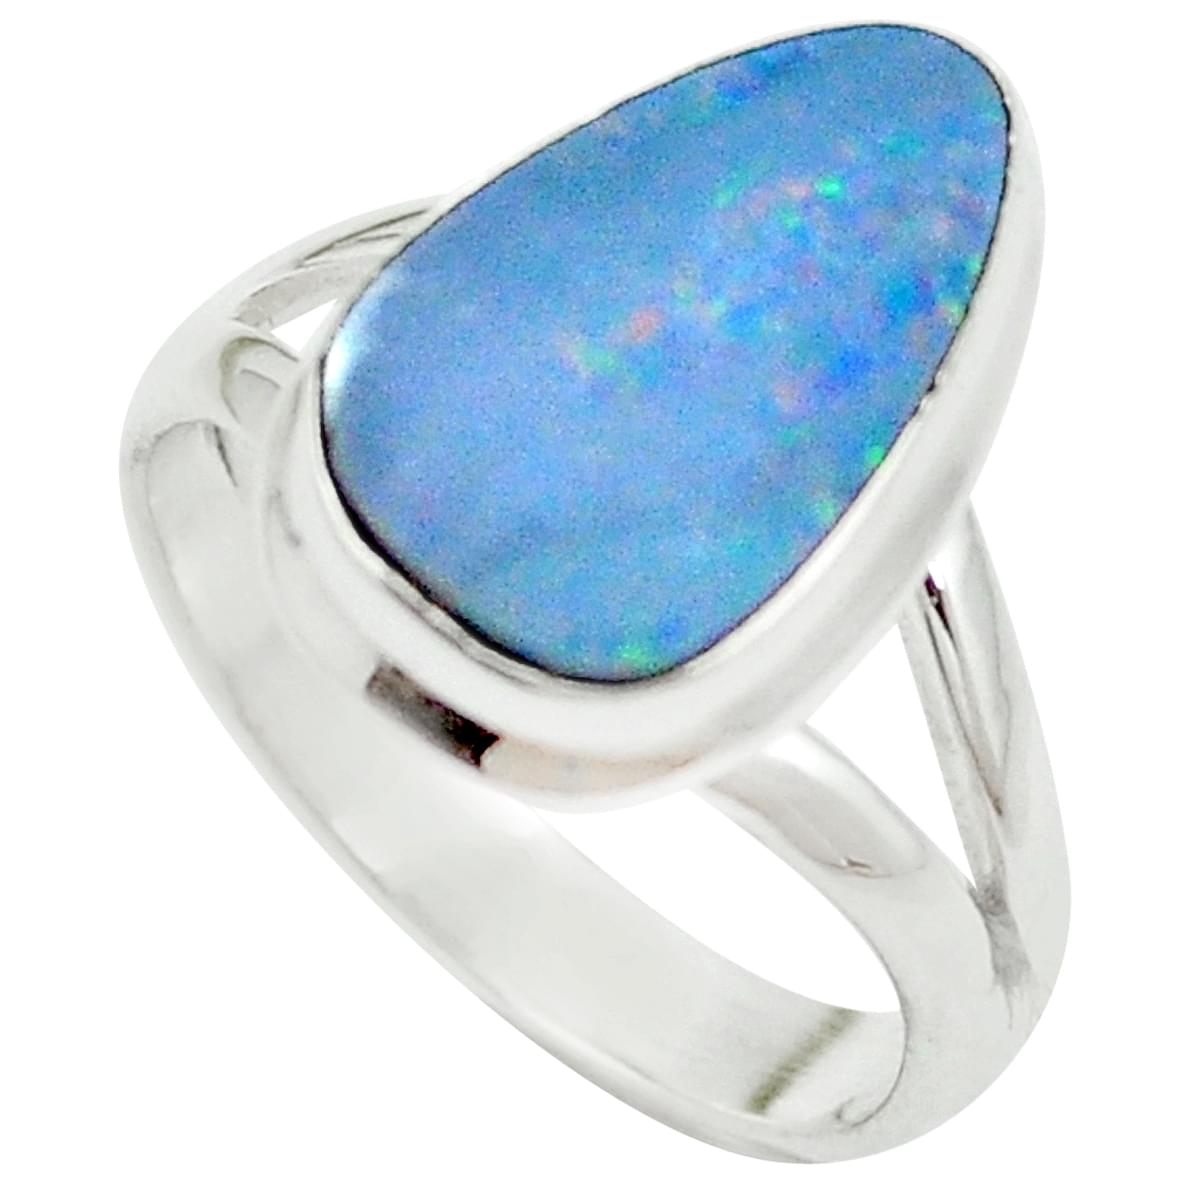 Details about   Nice Australian Triplet Opal Gemstone 925 Sterling Silver Handmade Ring All Size